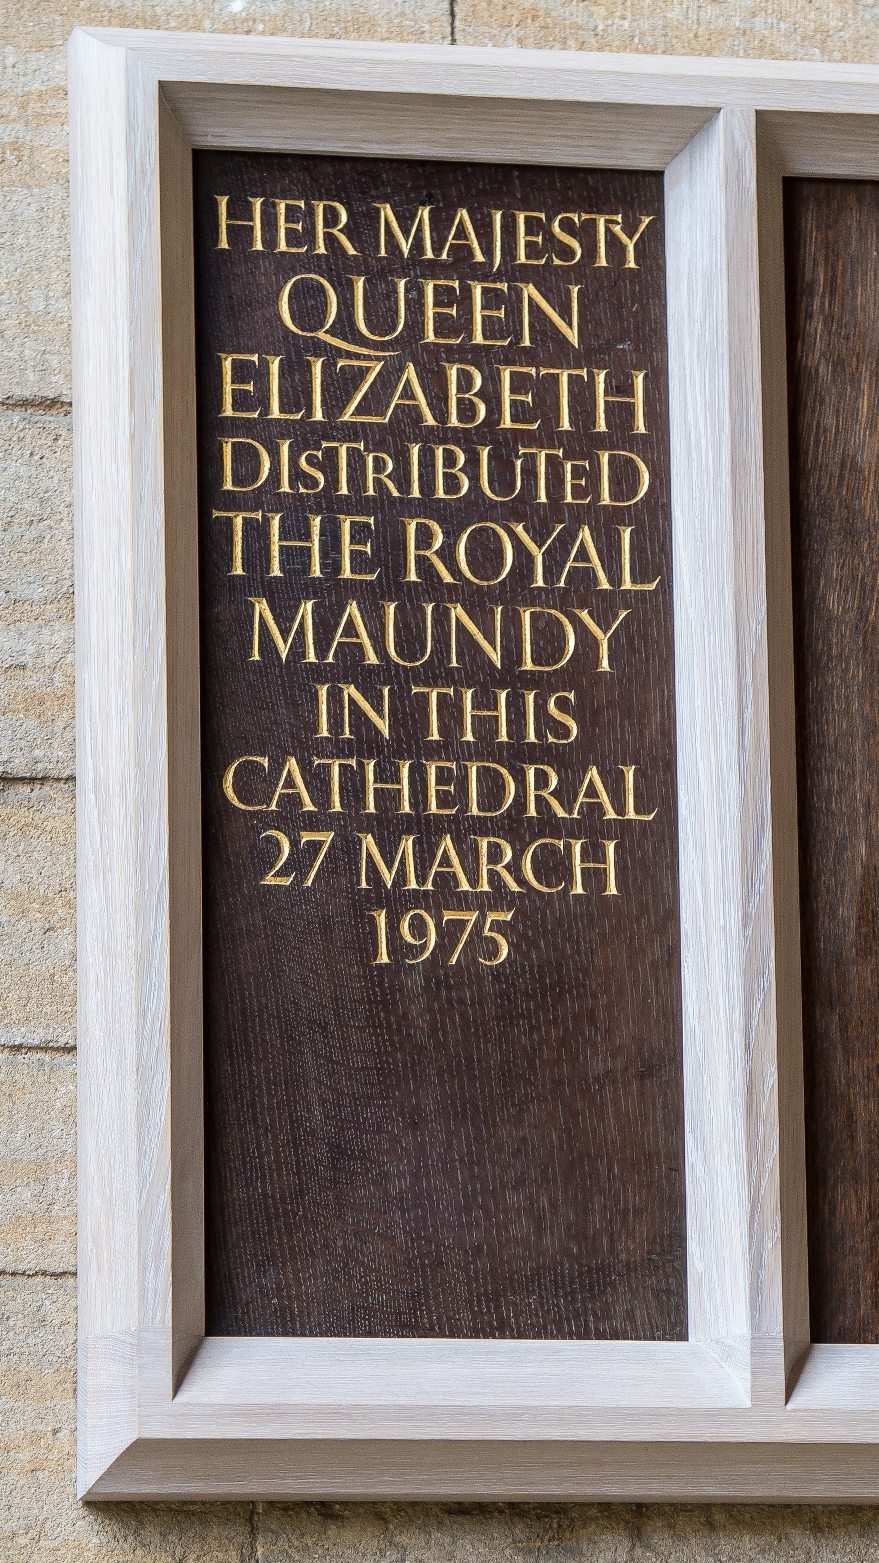 A plaque commemorating Queen Elizabeth II giving the Maundy Money at Peterborough Cathedral, 1975